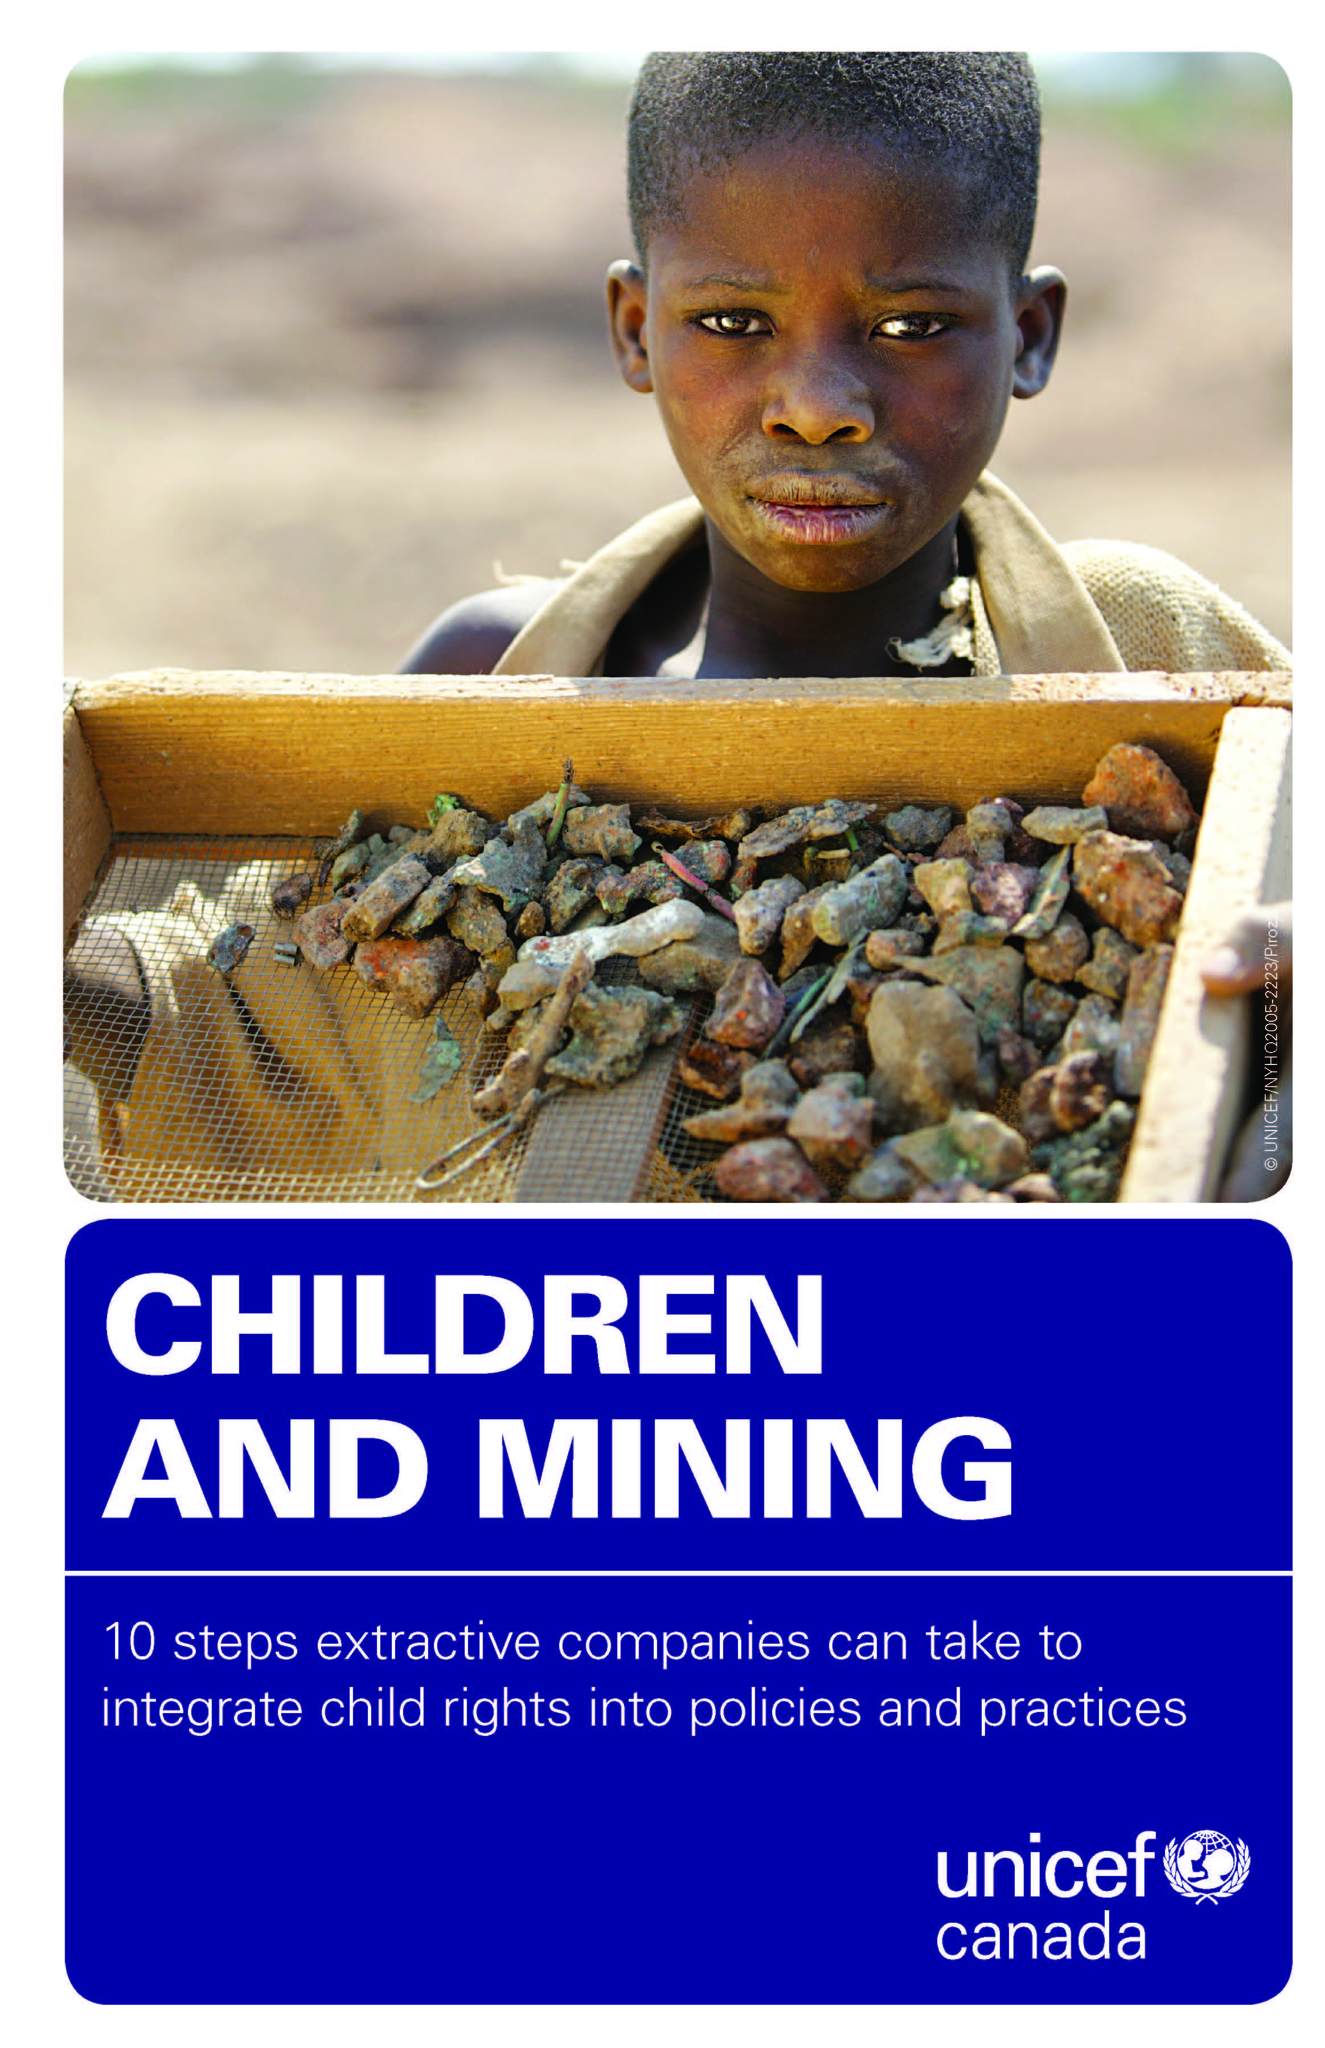 10 steps extractive companies can take to integrate child rights into policies and practices